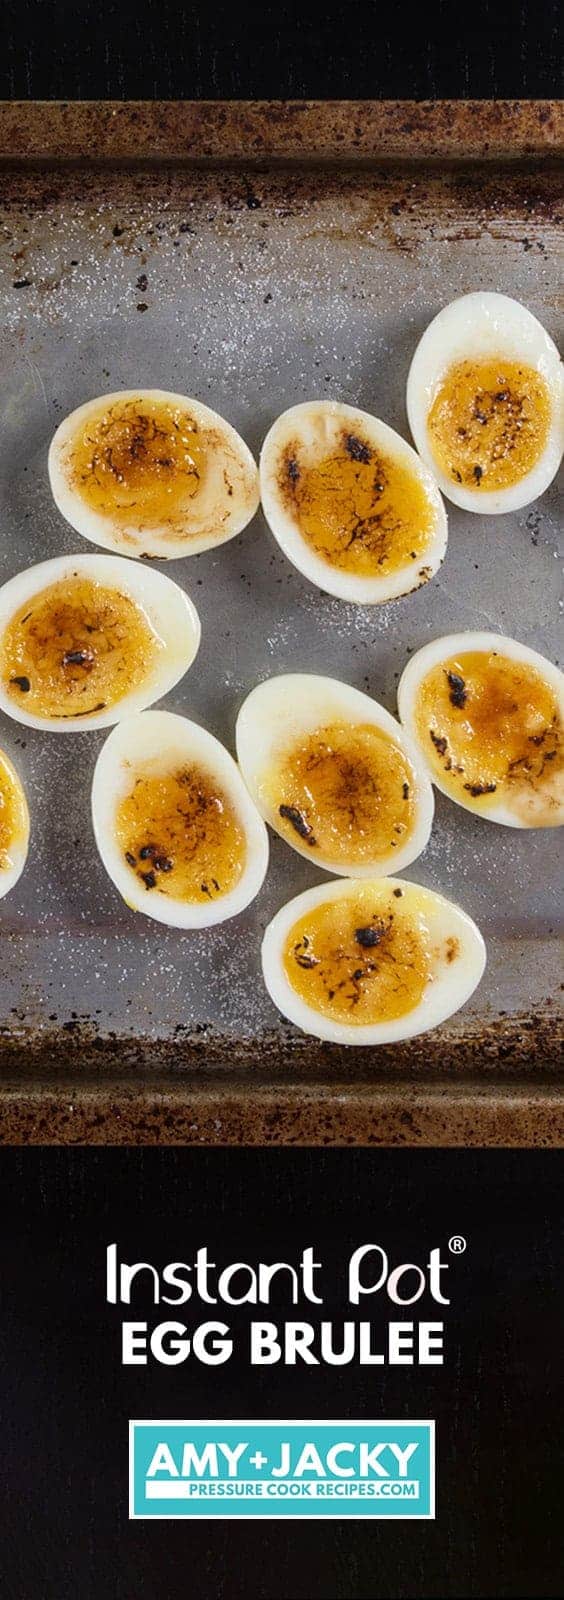 Instant Pot Egg Brulee Recipe (Pressure Cooker Egg Brûlée): Make this 3-ingredient Egg Brulee to impress your guests! Simple yet fancy soft boiled egg hor d'oeuvres or appetizer. Perfect for holiday potlucks or Christmas parties!